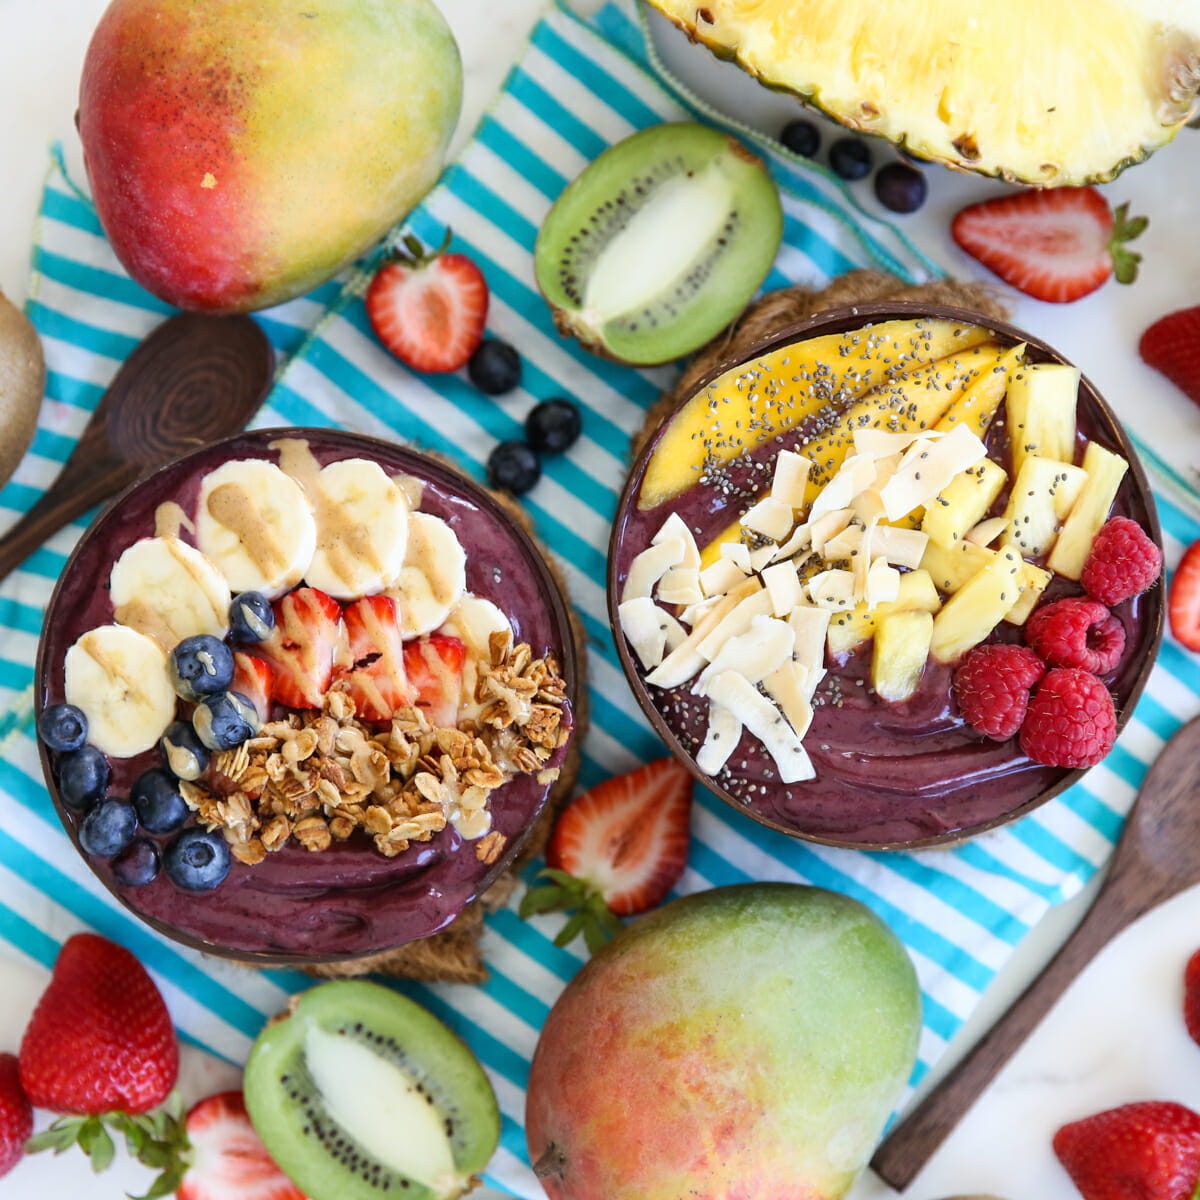 Two acai bowls, topped with fruit